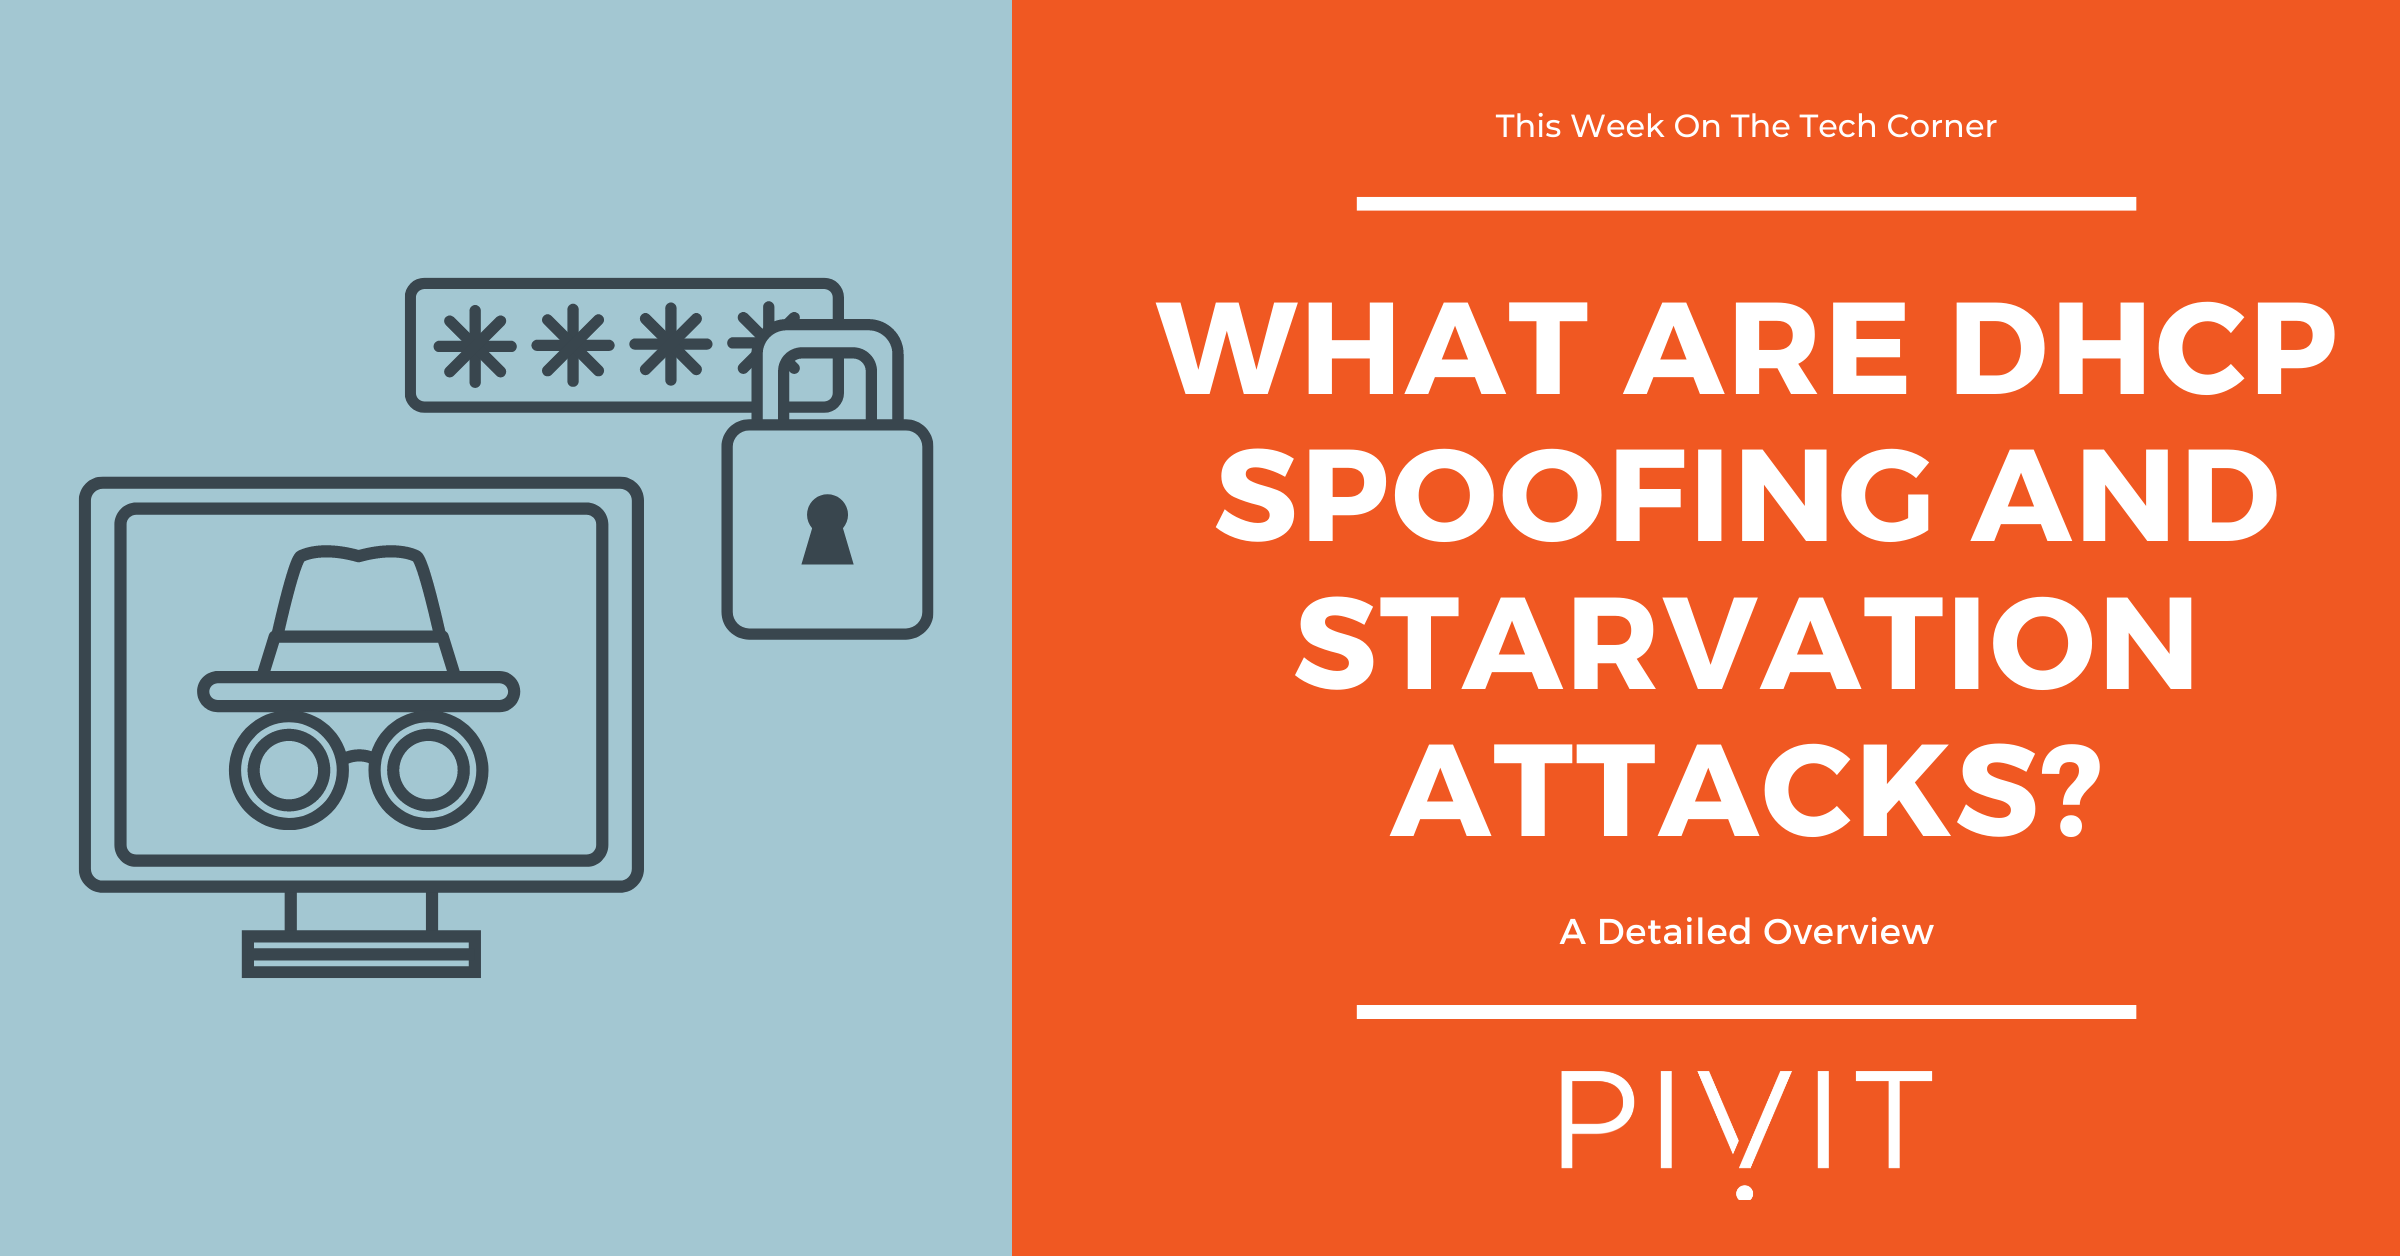 What Are DHCP Spoofing and Starvation Attacks? A detailed overview